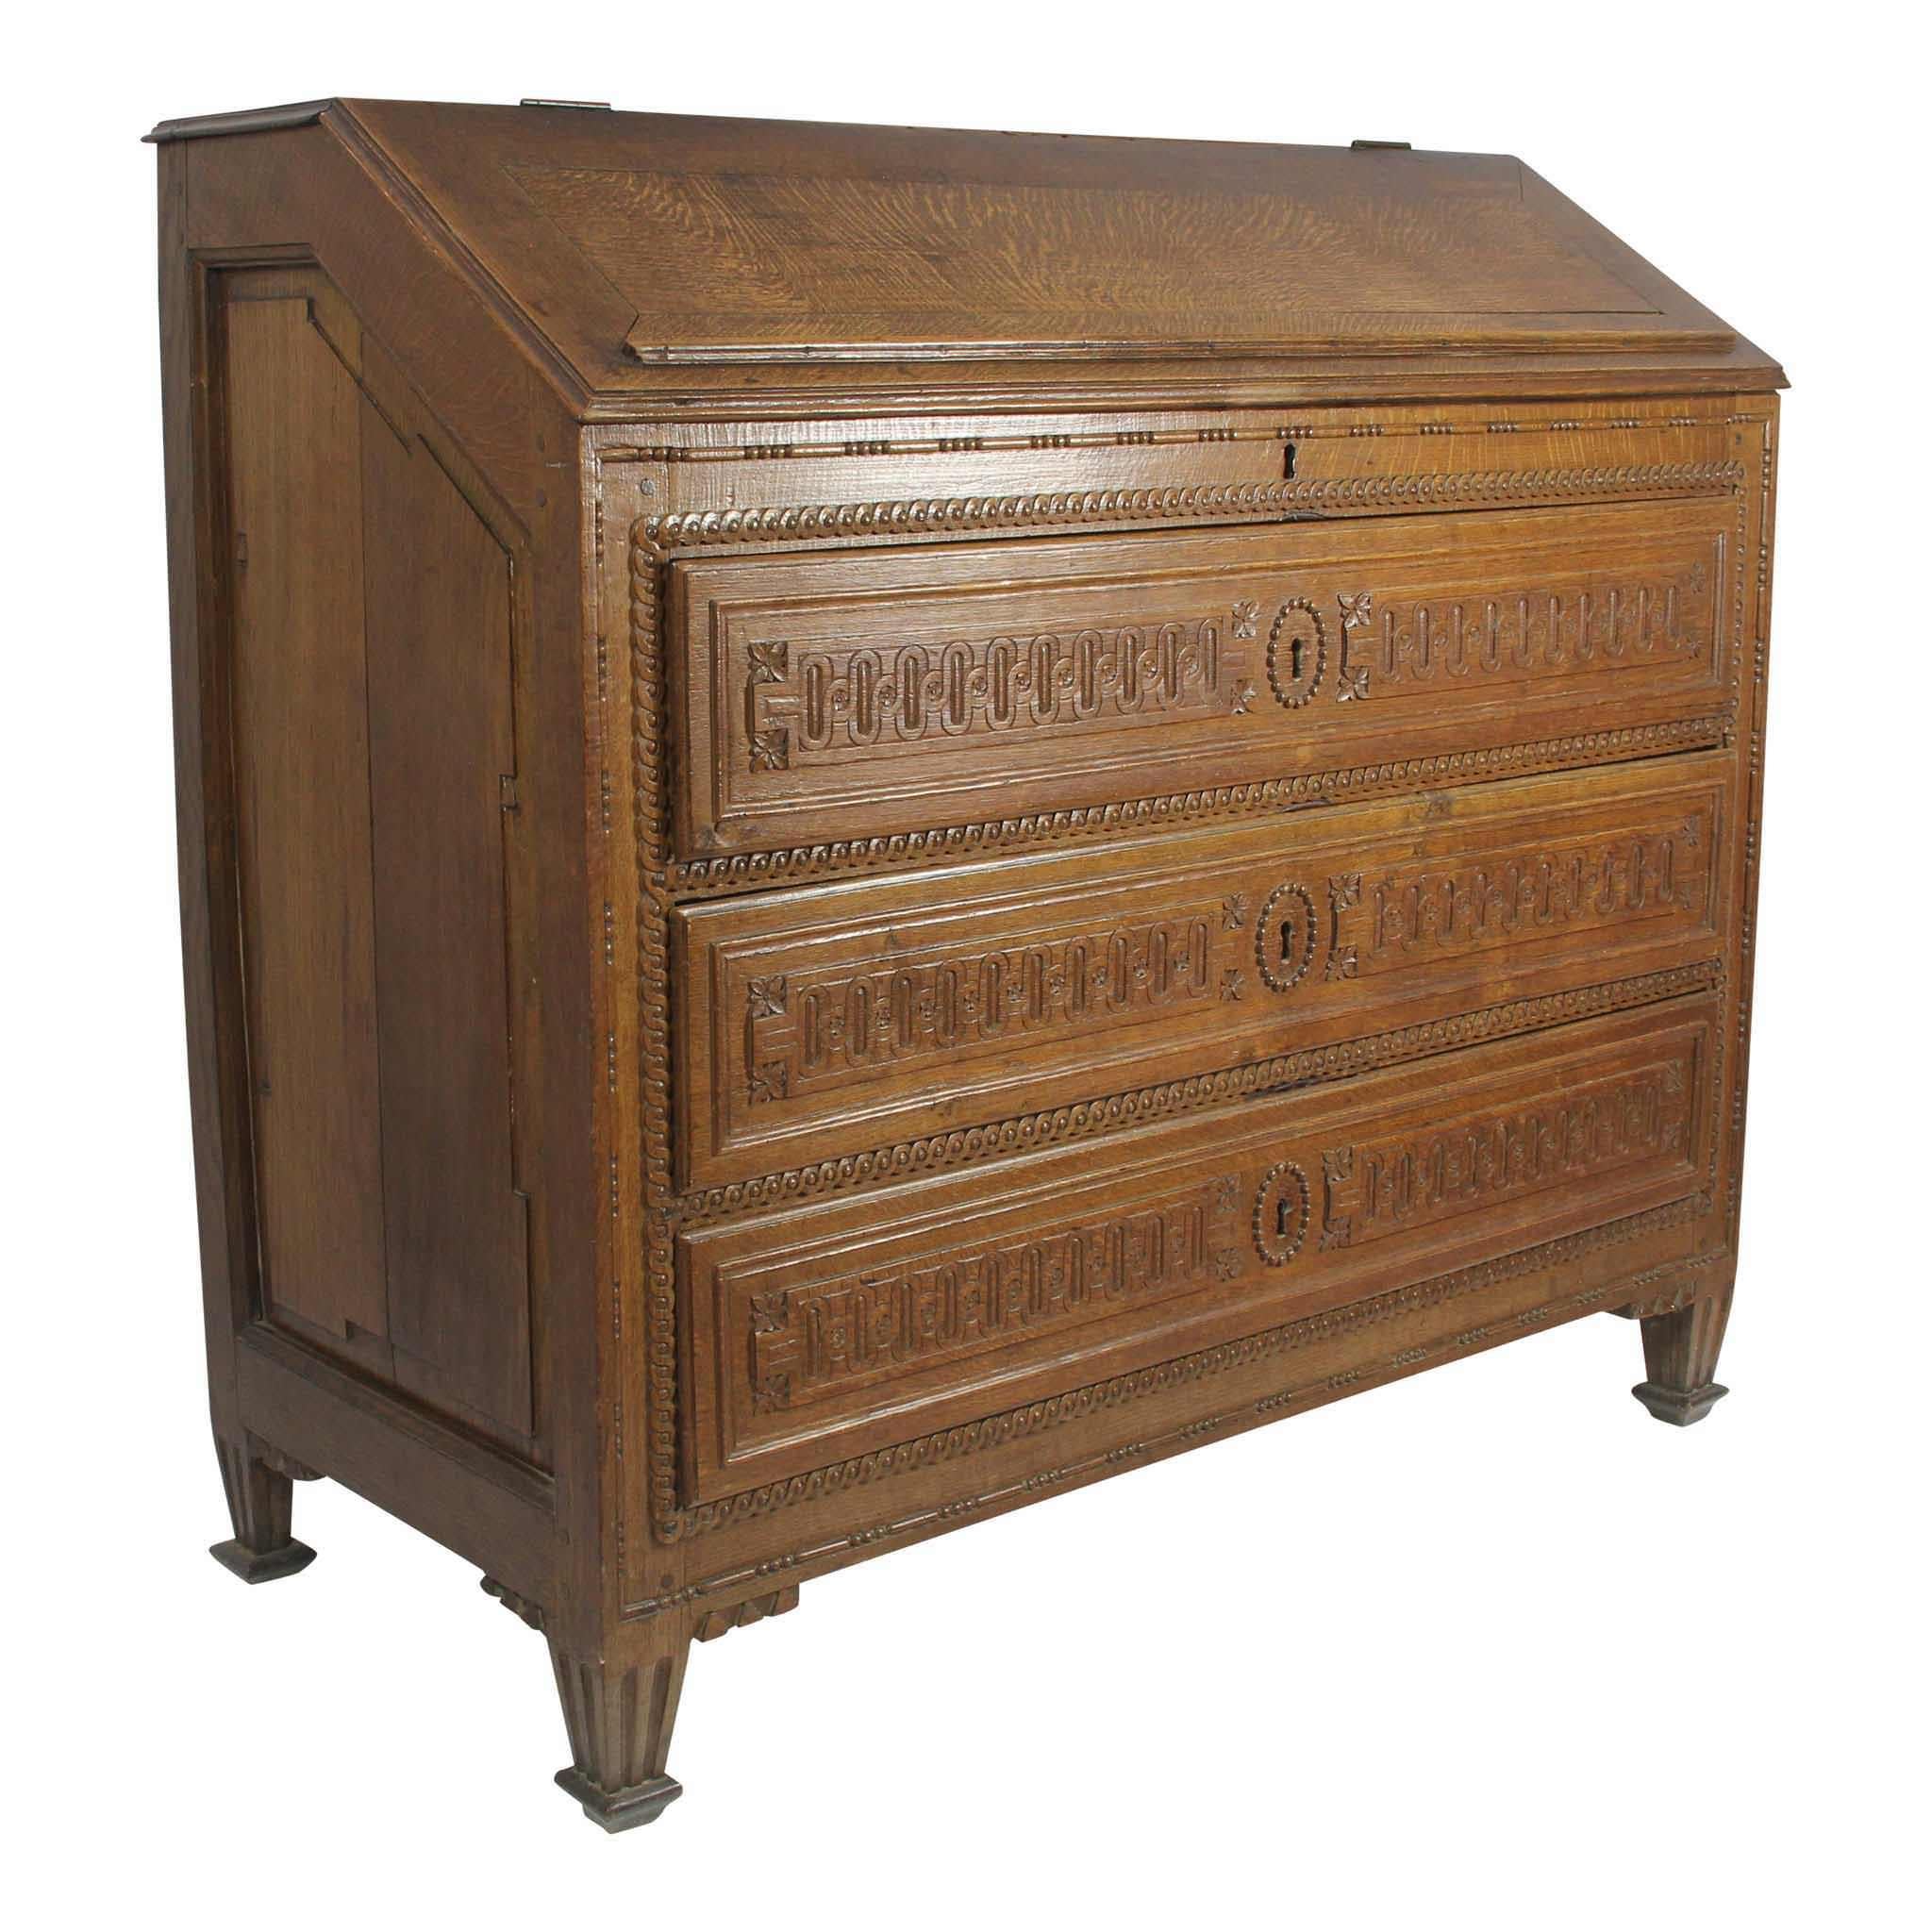 Made of solid oak and finished with a light stain, this beautiful writing desk has a narrow depth that maximizes storage without sacrificing floor space. Unlike many writing desks, the slanted, top face of this desk folds up rather than down. This